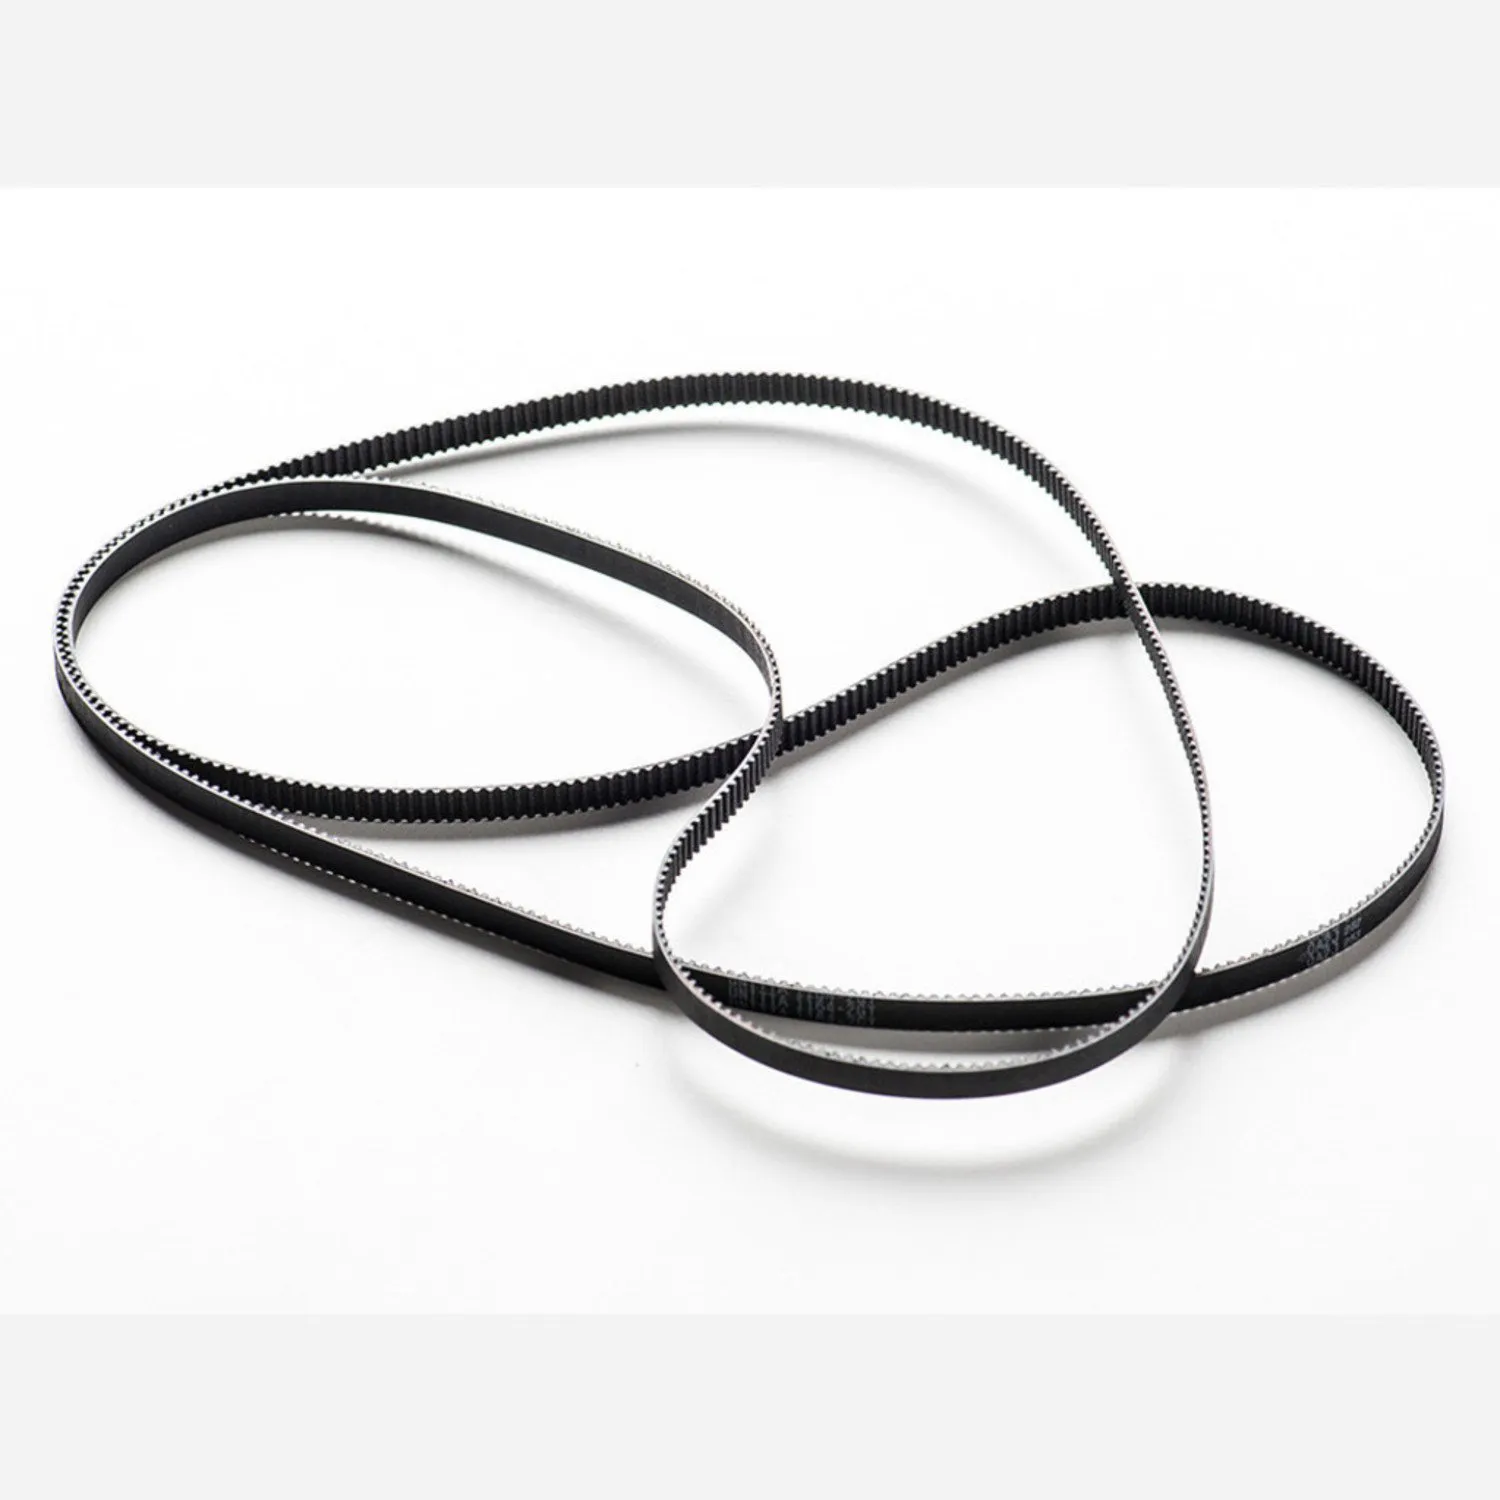 Photo of Timing Belt GT2 Profile - 2mm pitch - 6mm wide 1164mm long